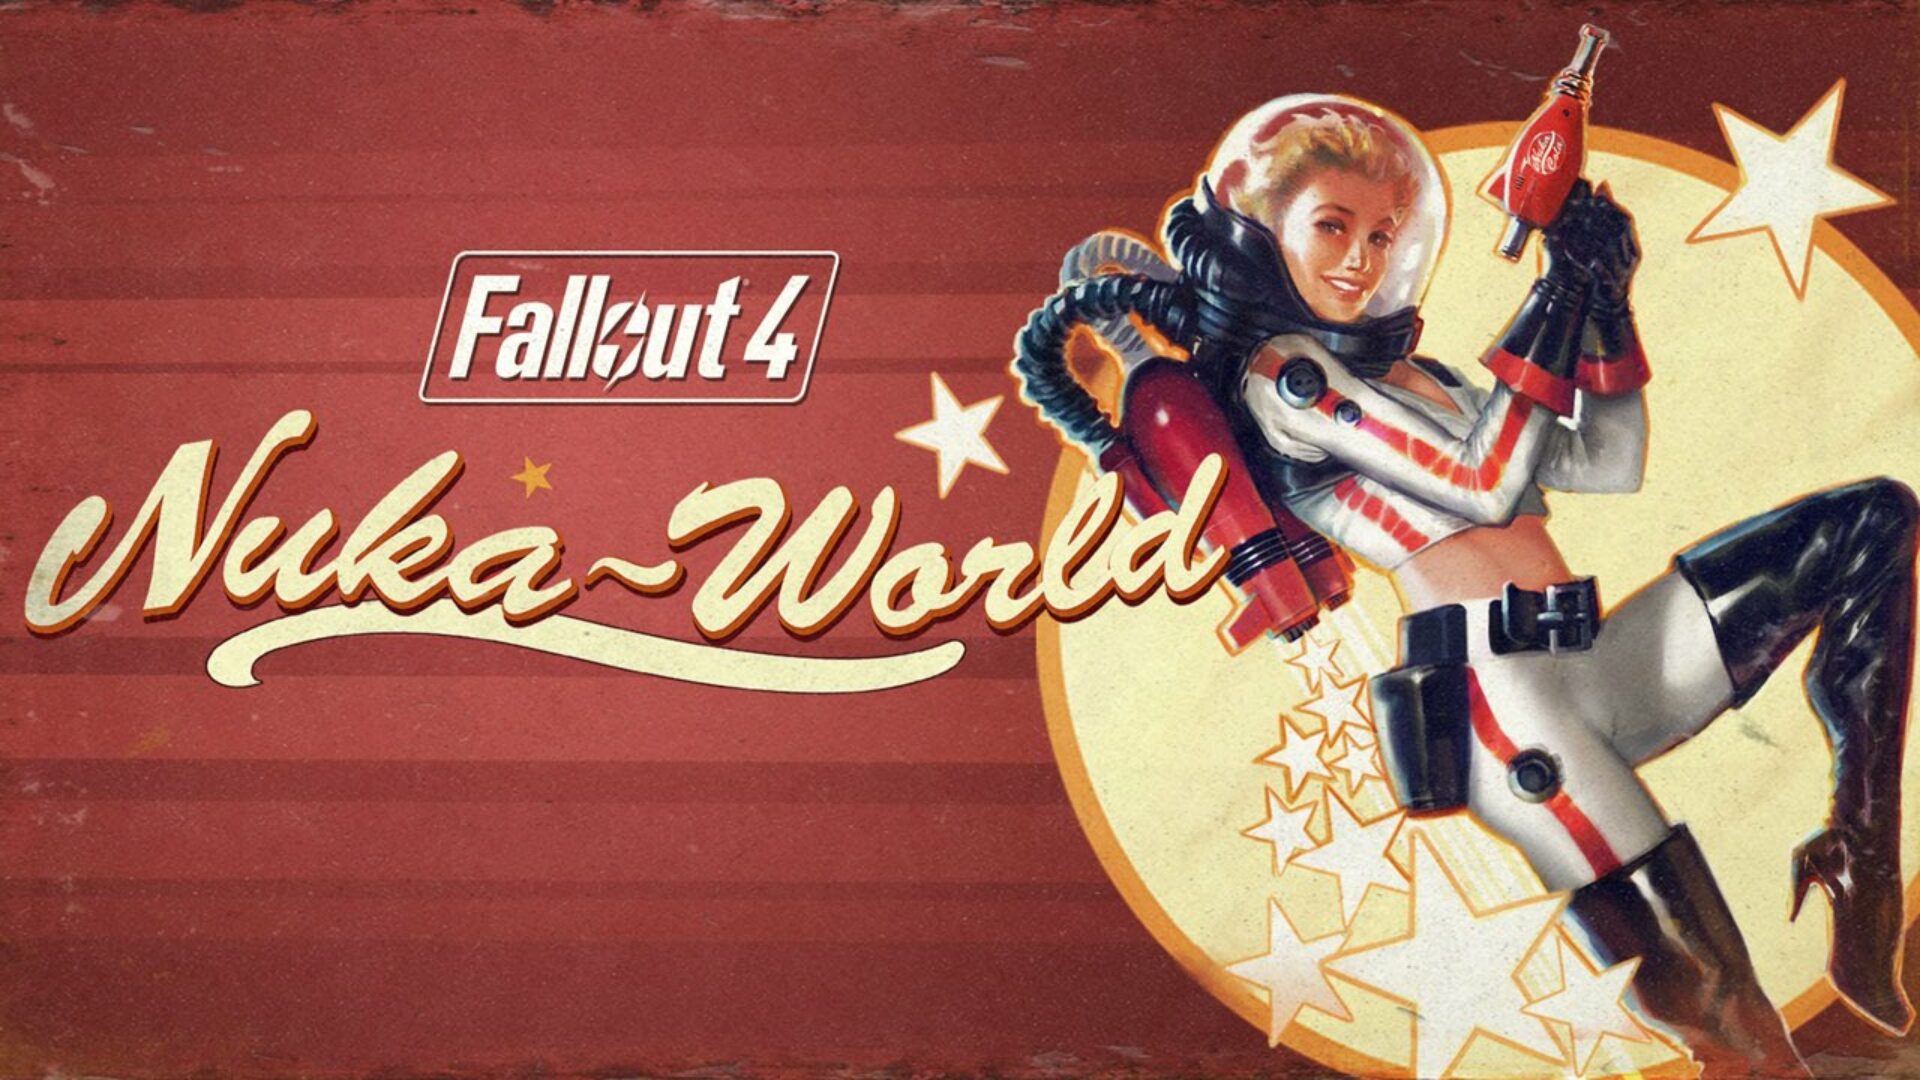 Fallout 4: Nuka World Gameplay Trailer Released!